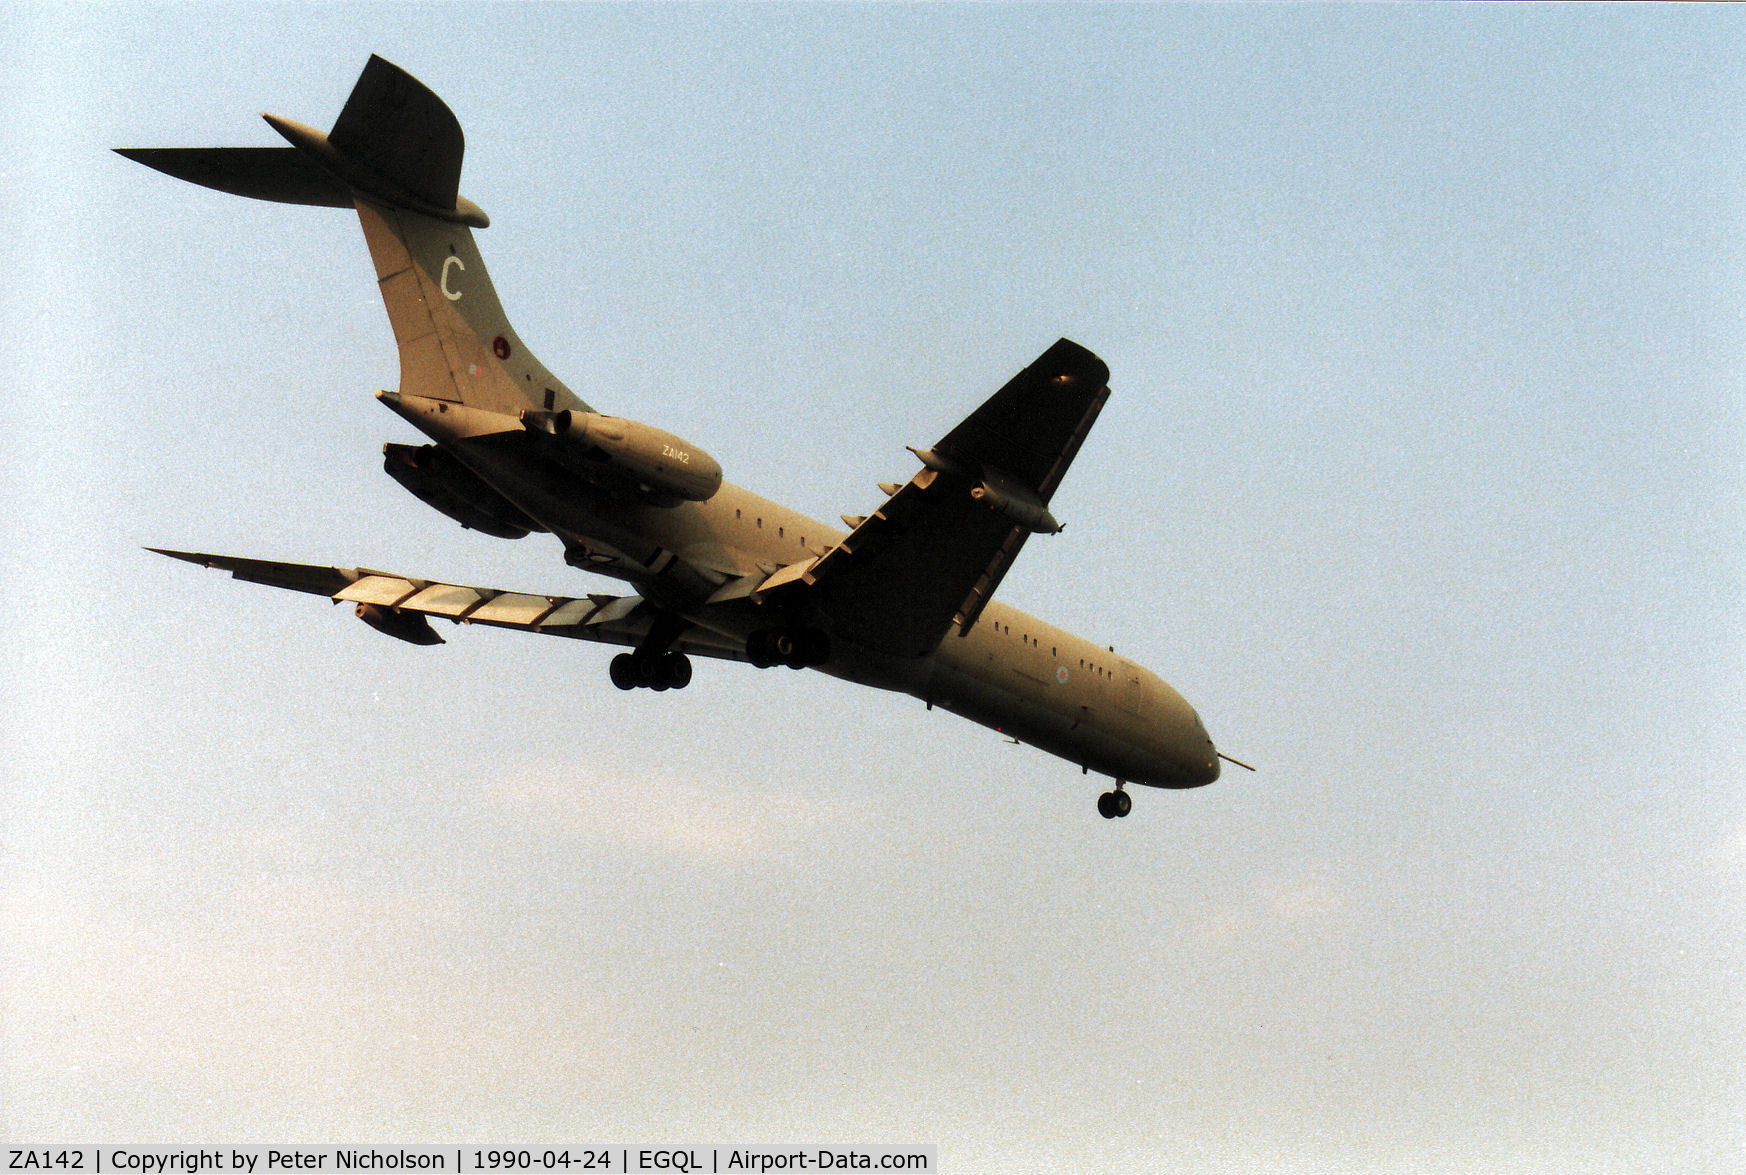 ZA142, 1964 Vickers VC.10 K2 C/N 811, VC-10 K.2 of 101 Squadron at RAF Brize Norton on final approach to RAF Leuchars in April 1990.